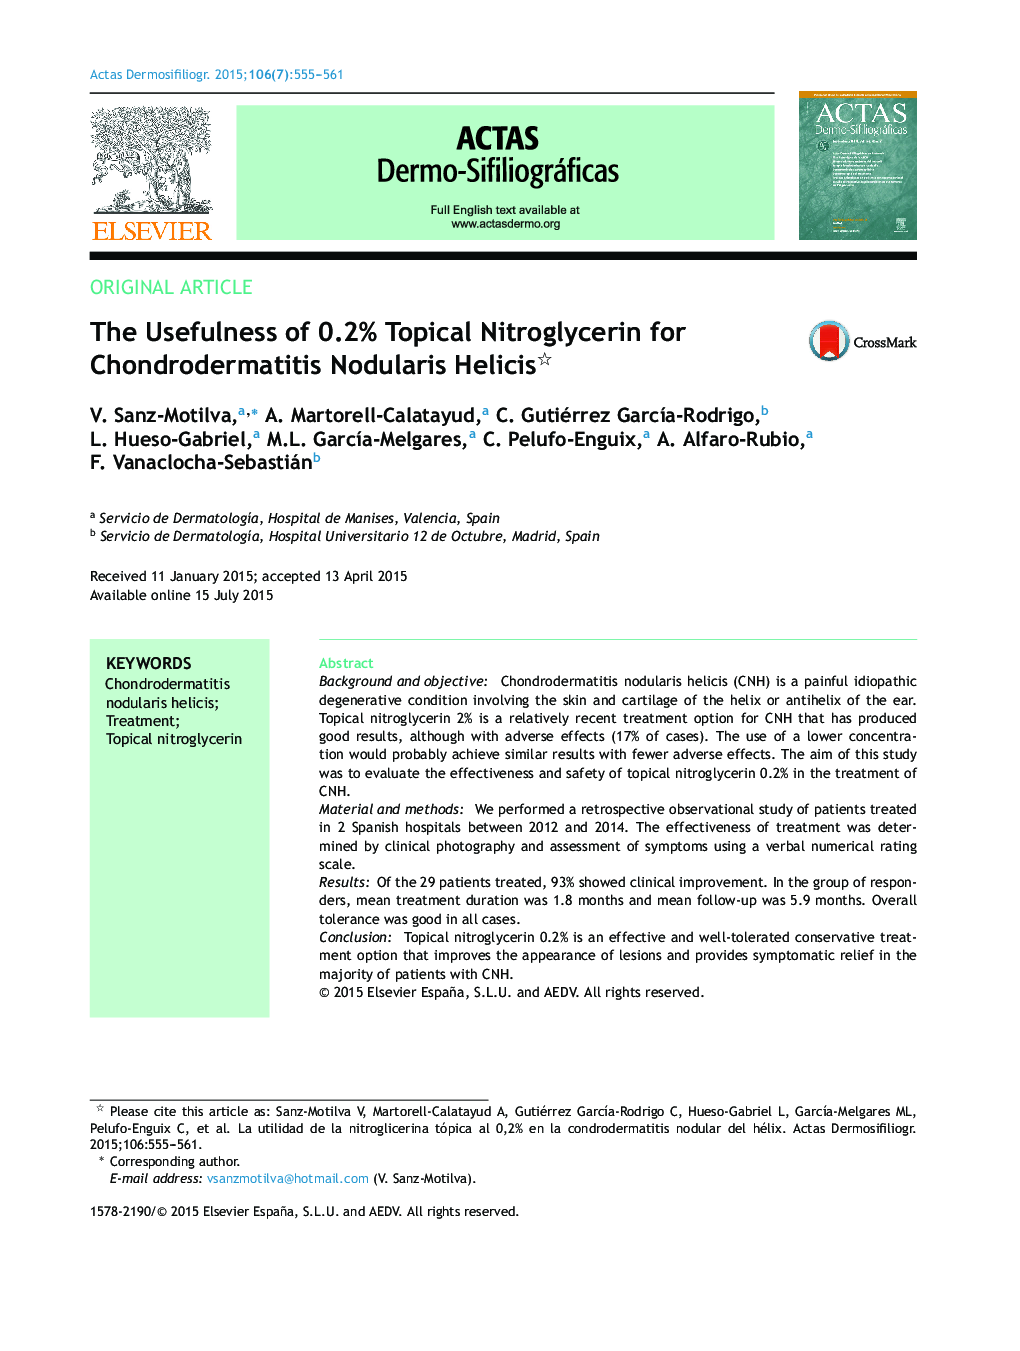 The Usefulness of 0.2% Topical Nitroglycerin for Chondrodermatitis Nodularis Helicis